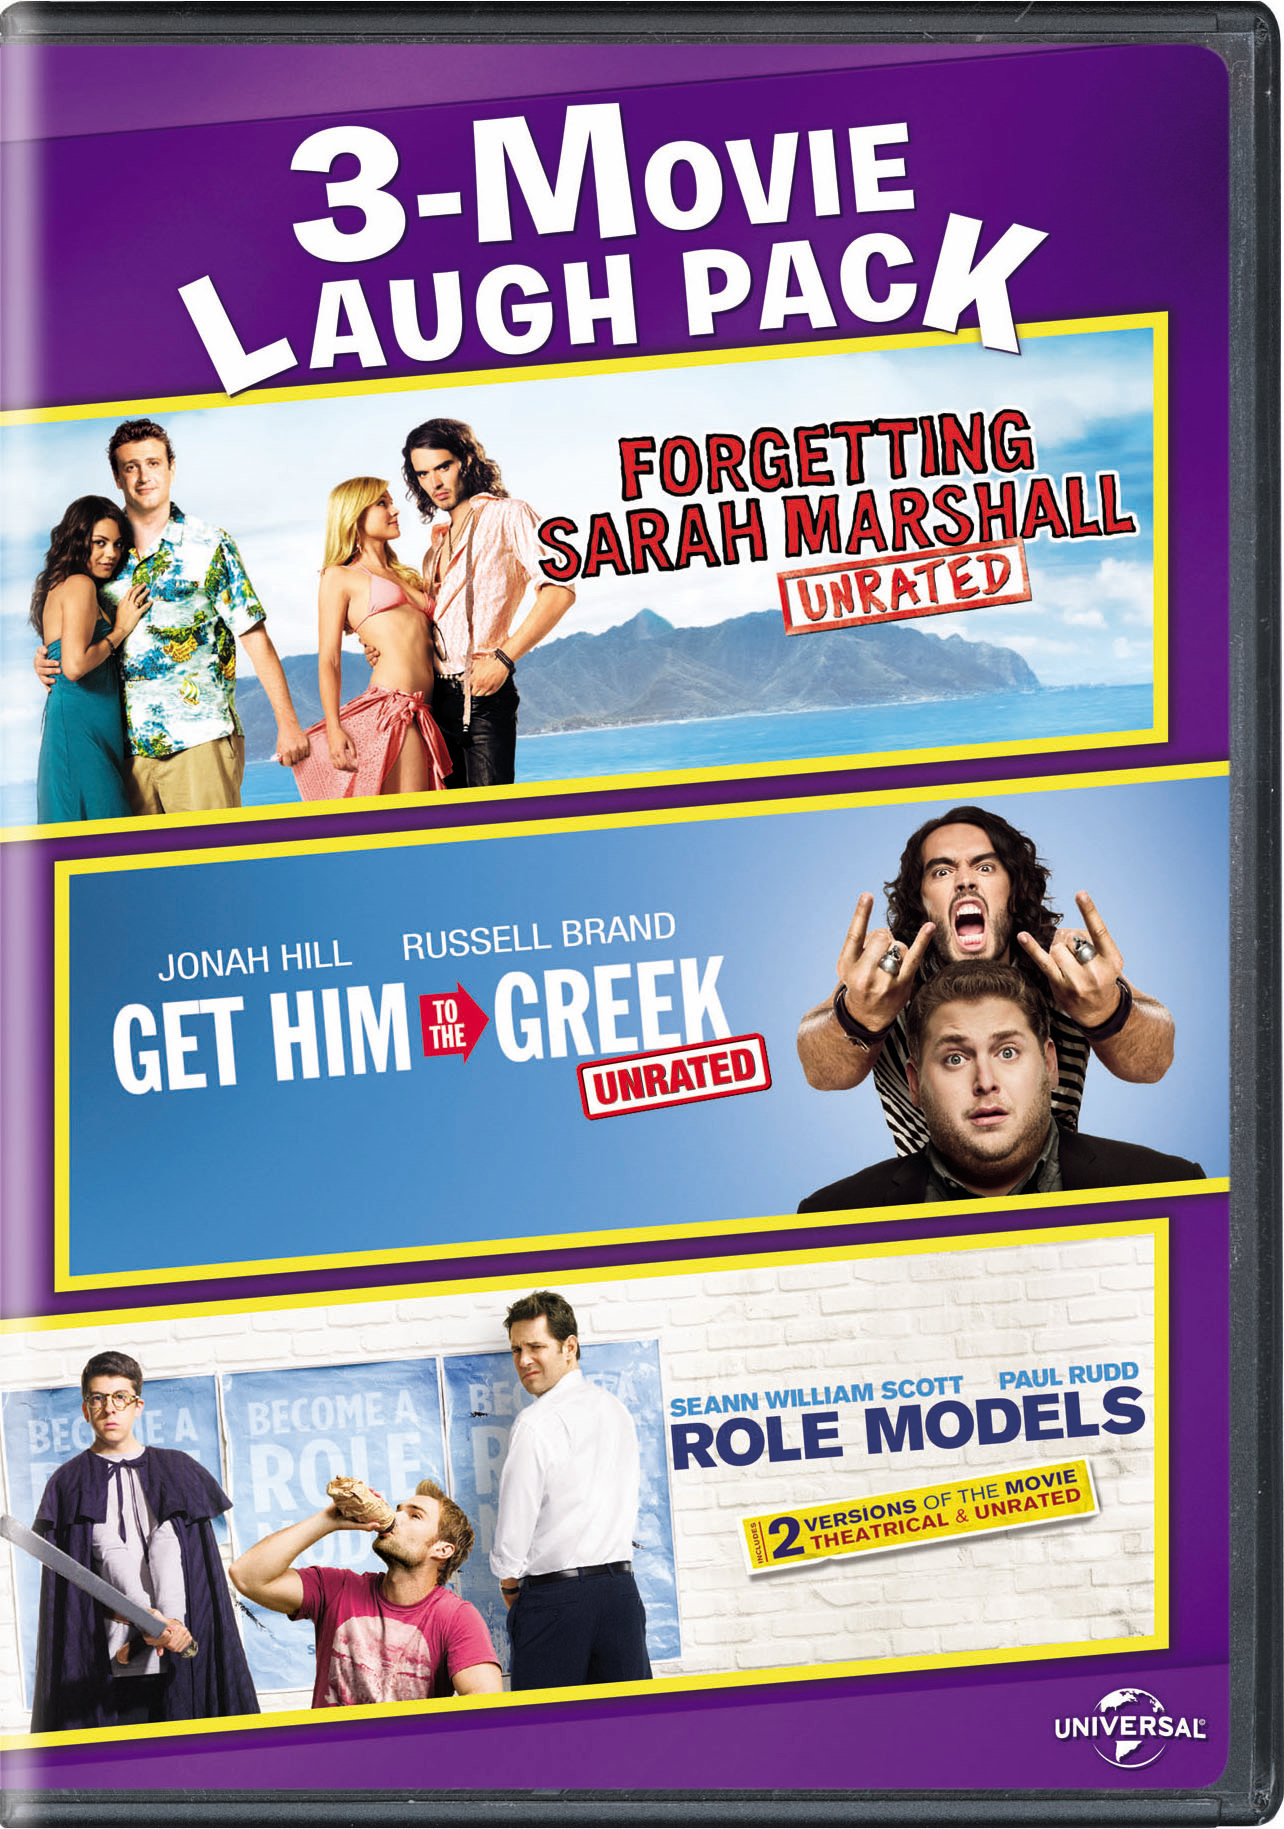 Forgetting Sarah Marshall/Get Him To The Greek/Role Models (DVD Set) - DVD [ 2010 ]  - Comedy Movies On DVD - Movies On GRUV